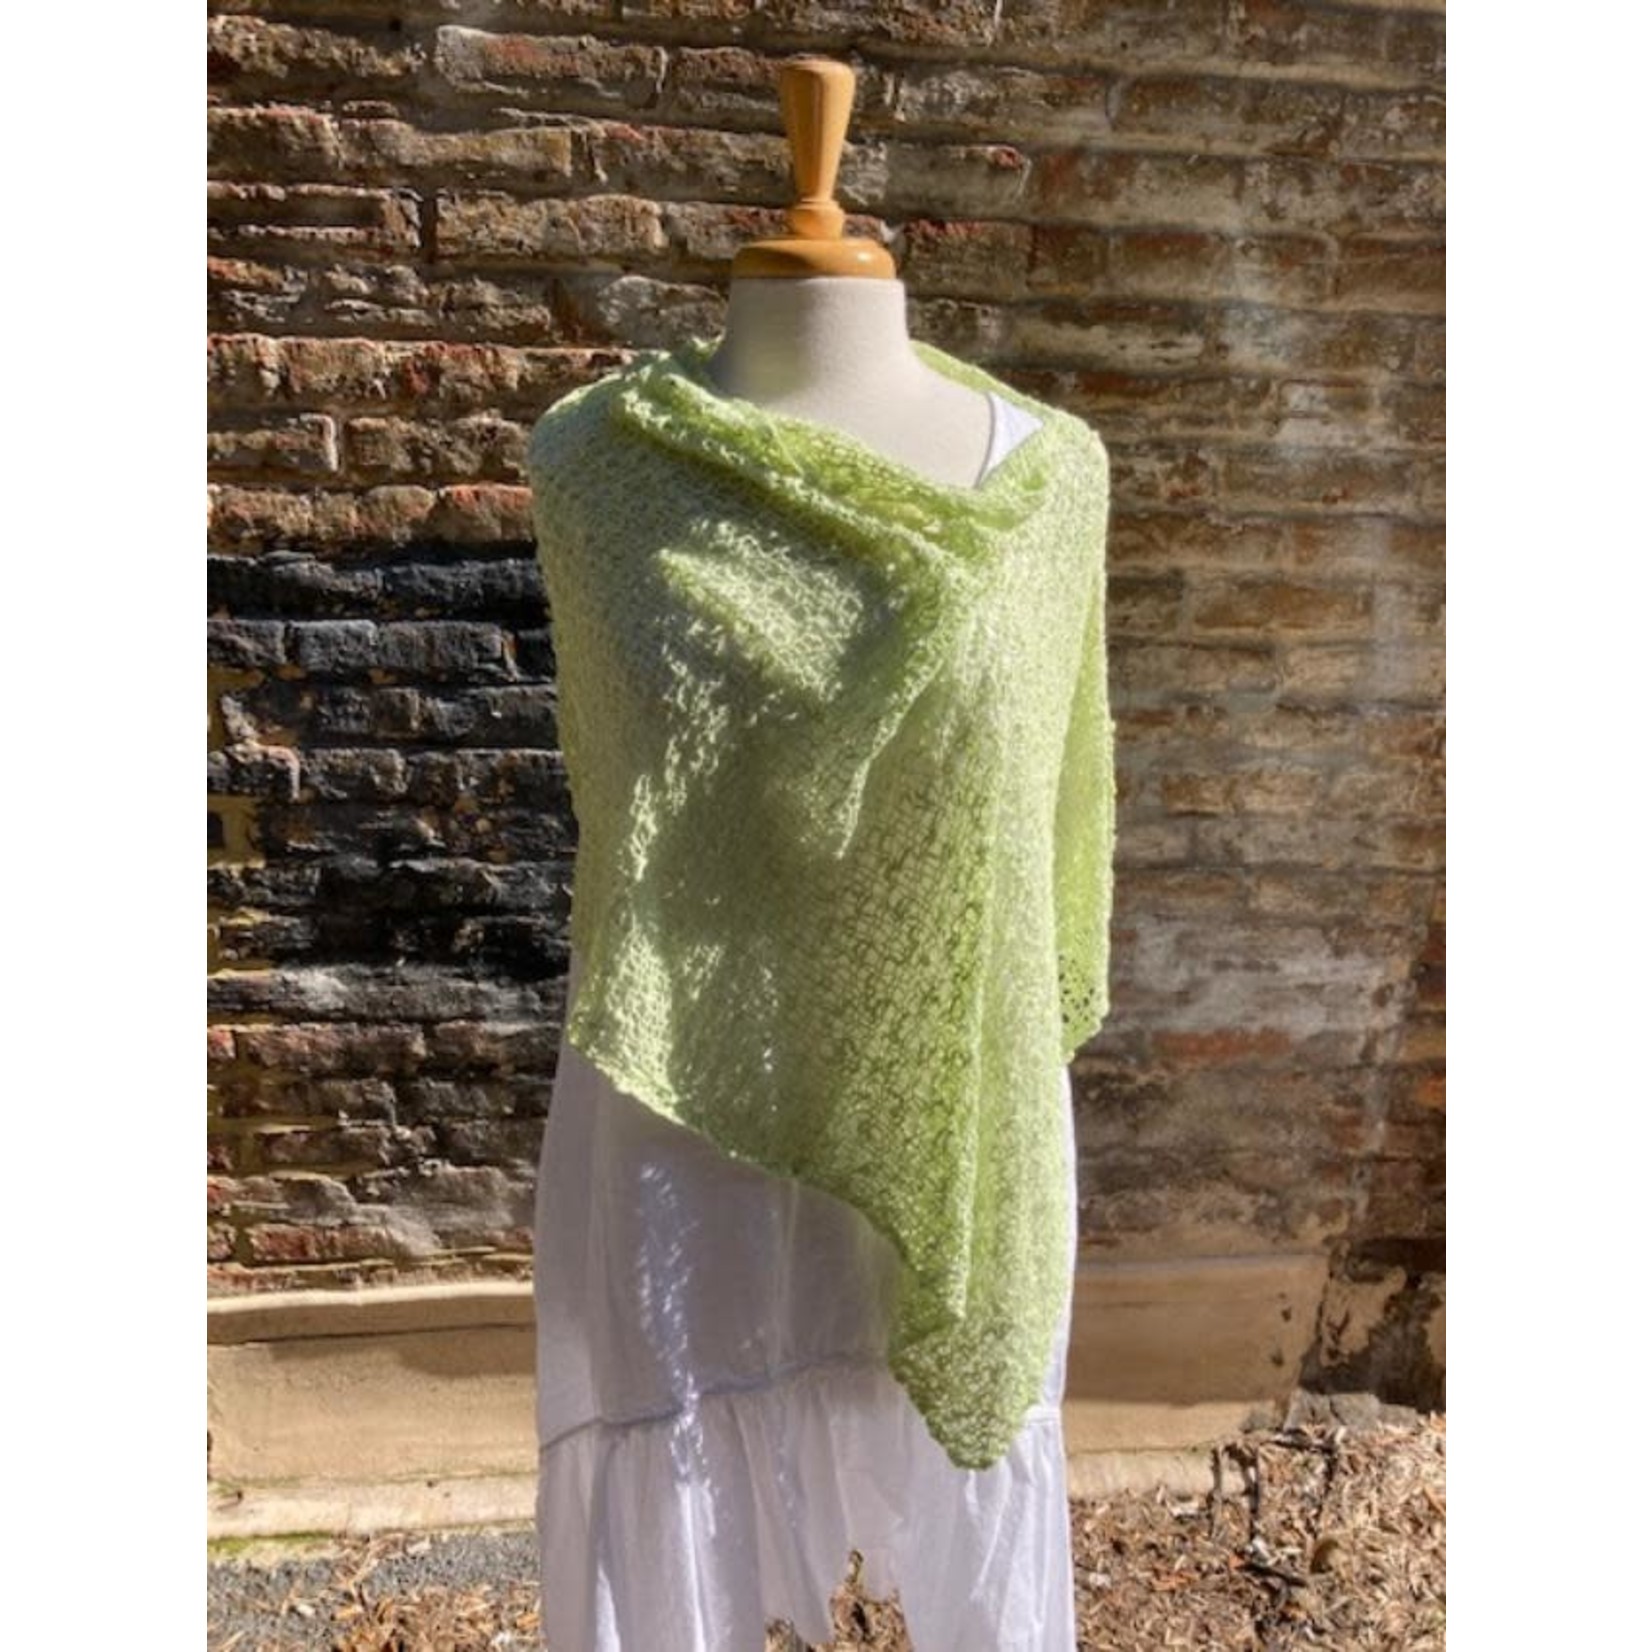 Lost River Imports Popcorn Poncho in Honeydew (10)